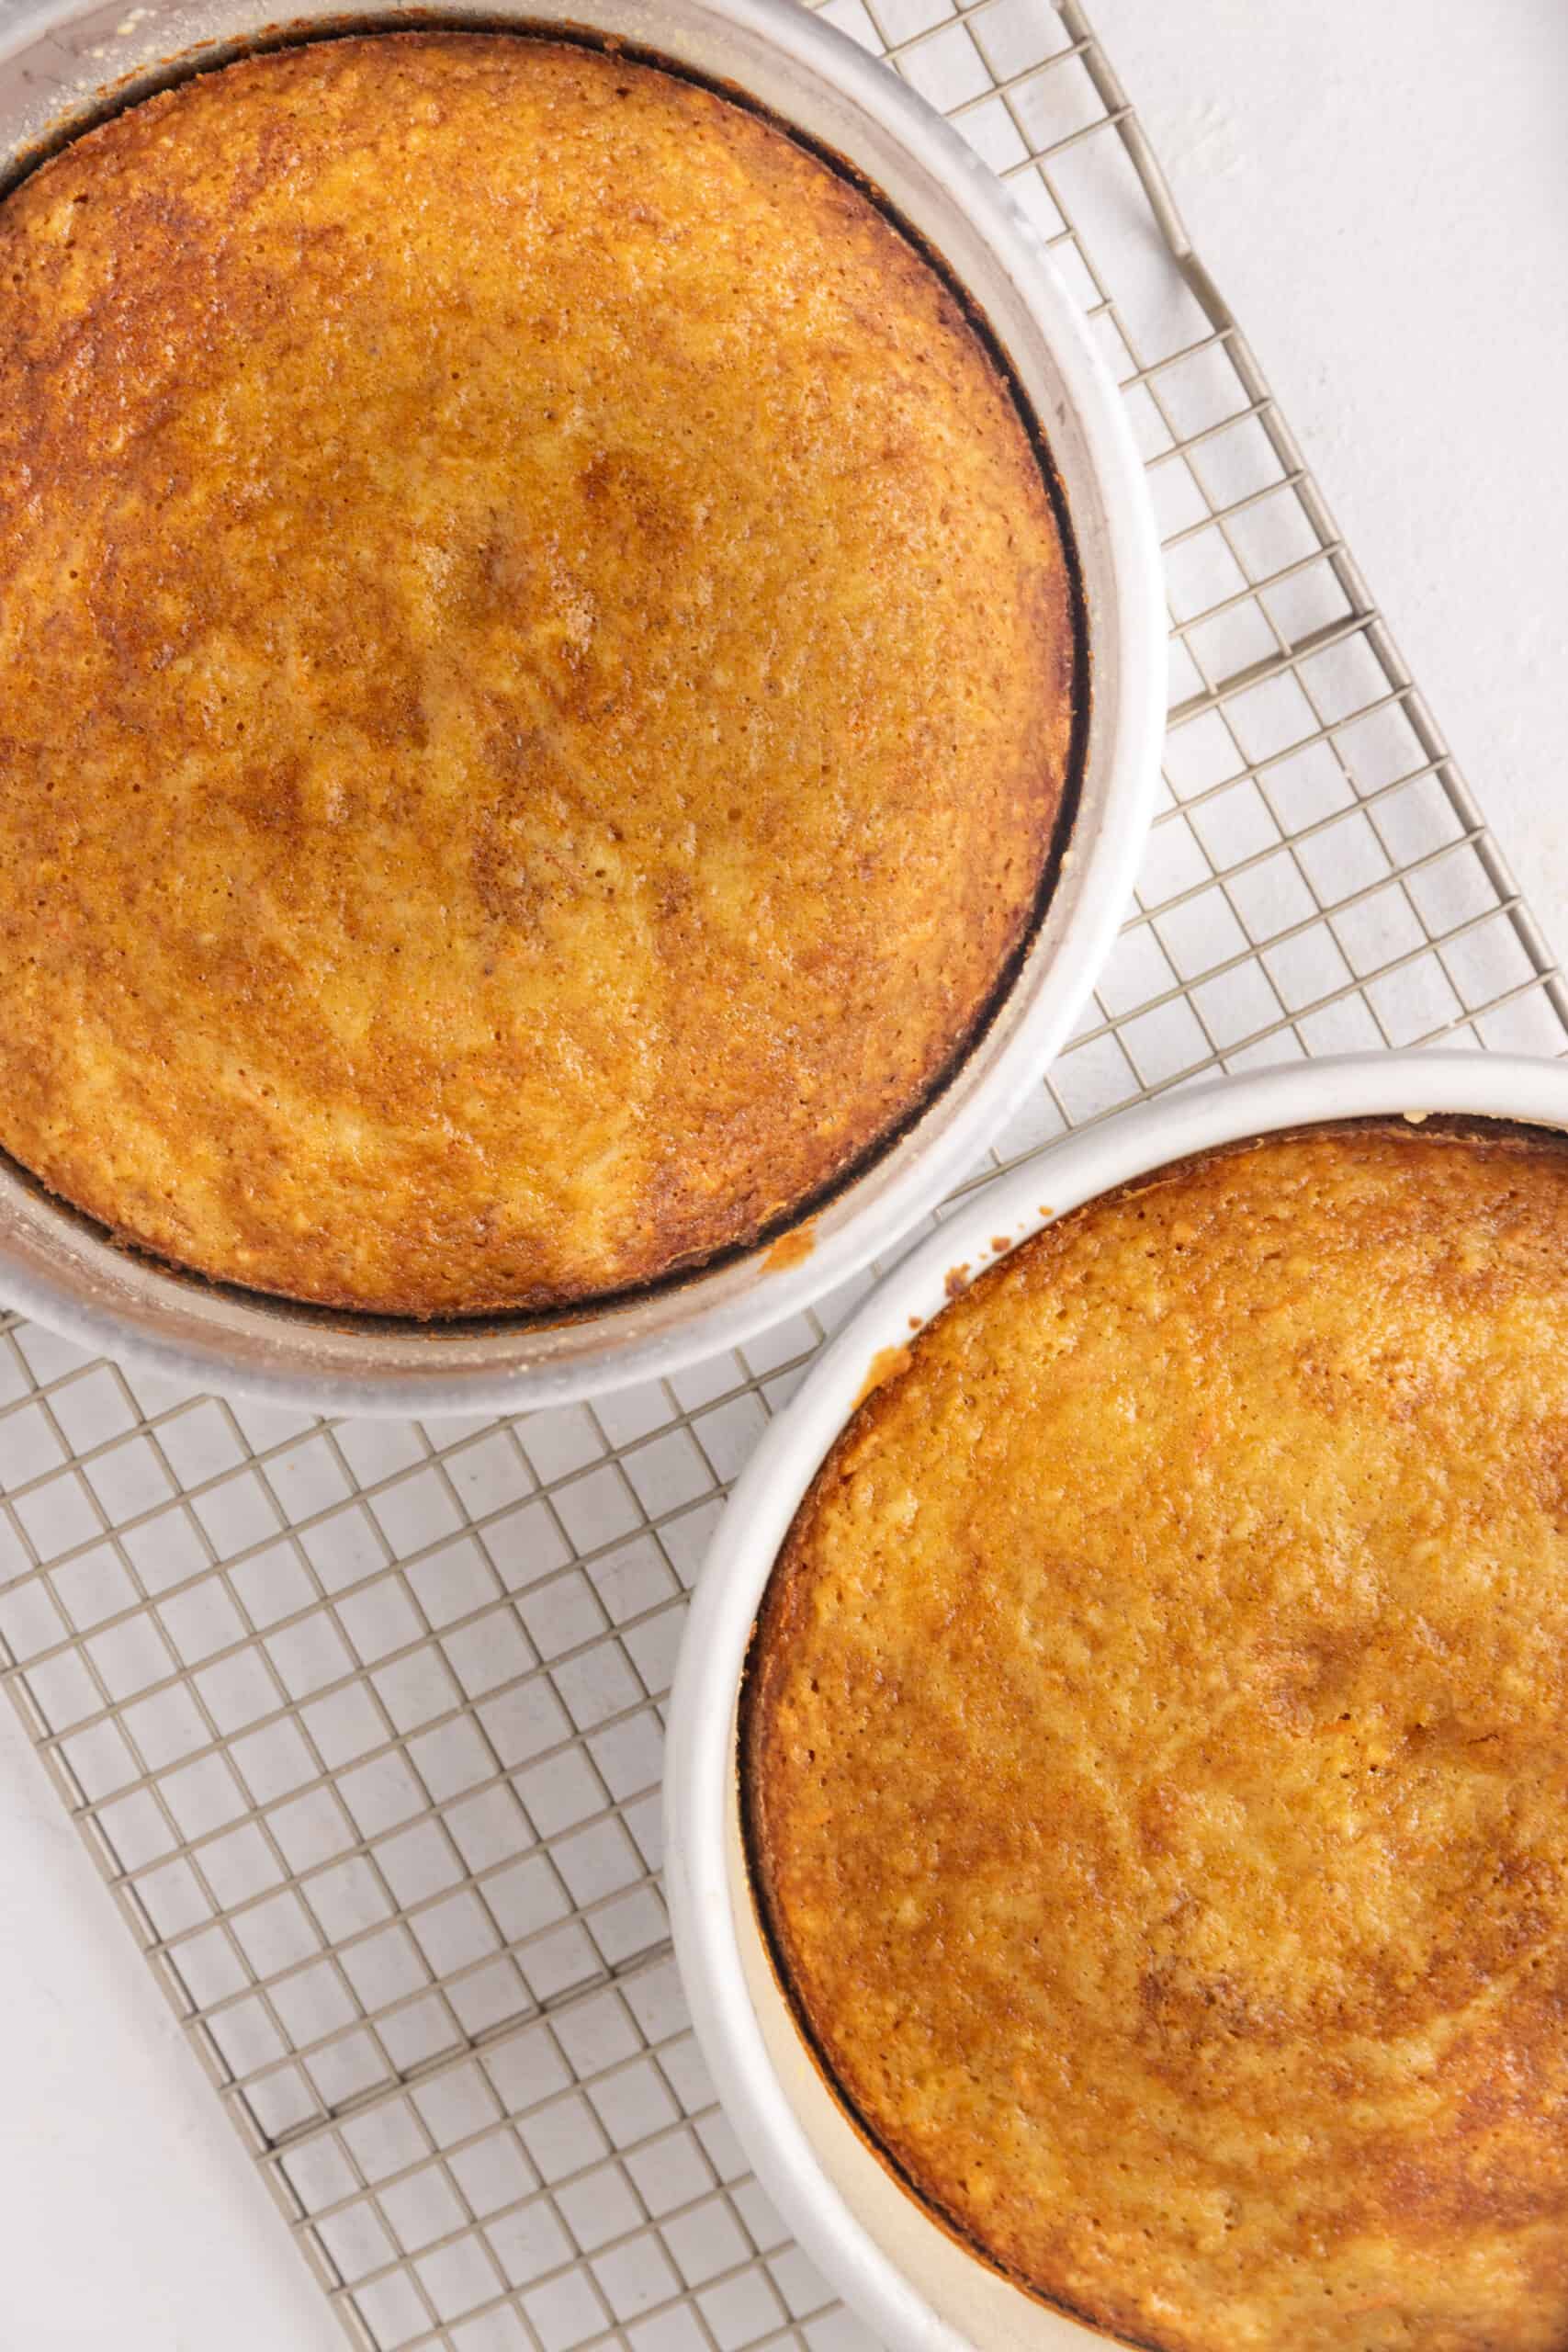 Two baked carrot cakes.